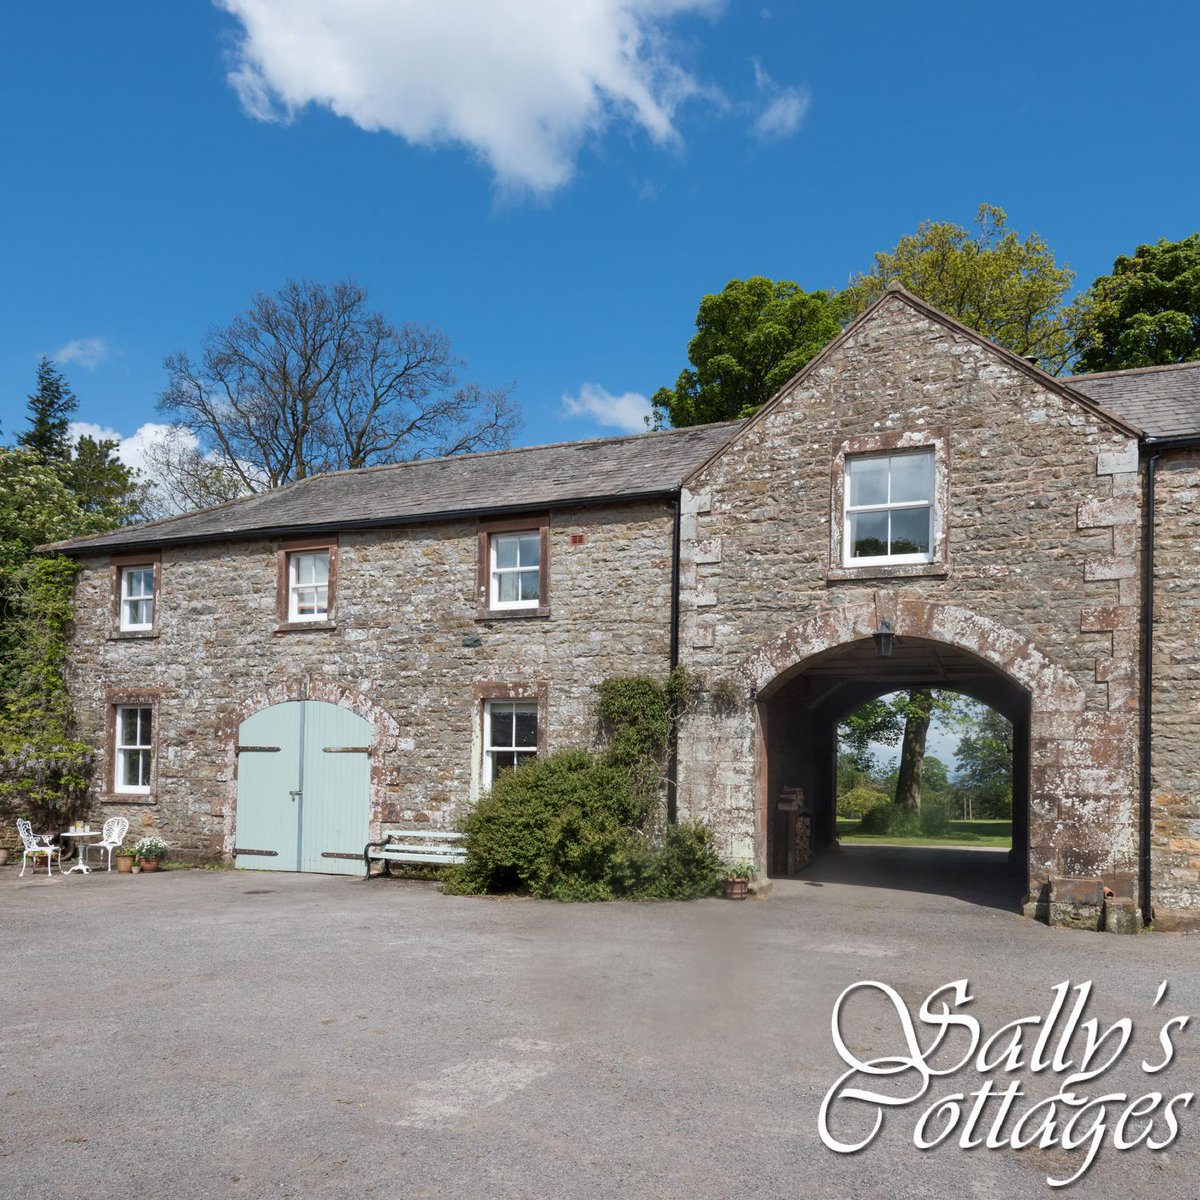 Sally S Cottages On Twitter Quarry Hill Stables Is So Special